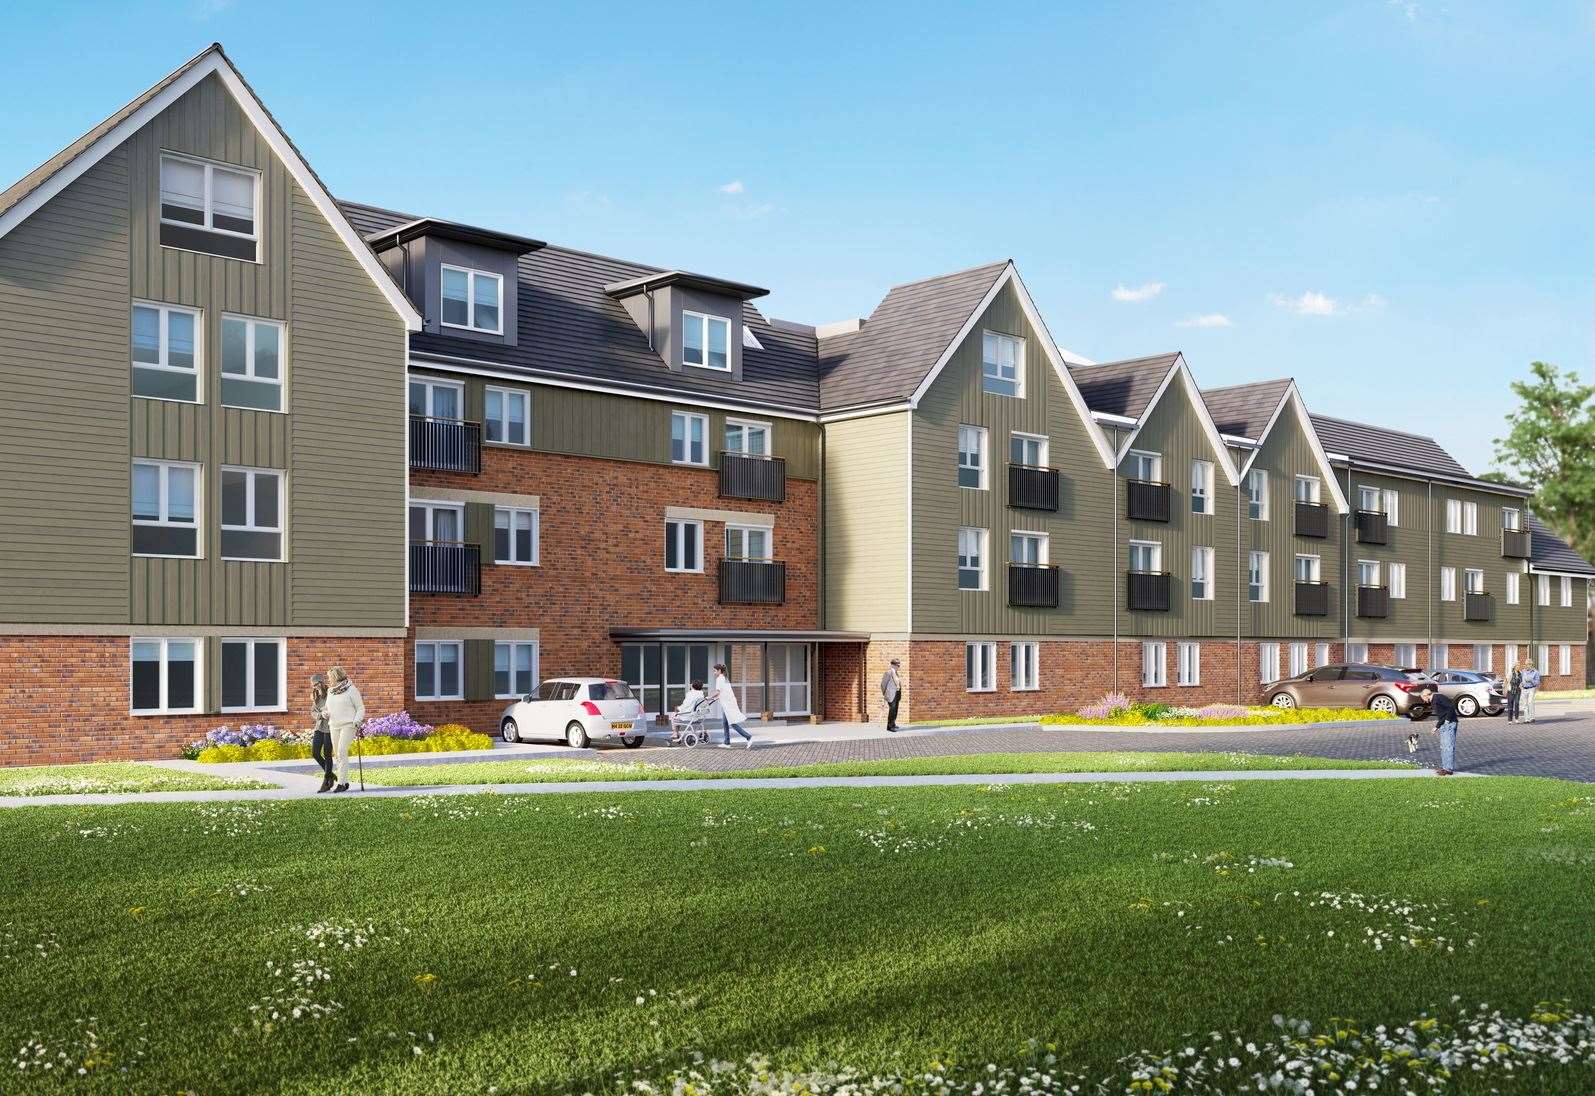 Modern and stylish retirement homes in Medway available through Shared